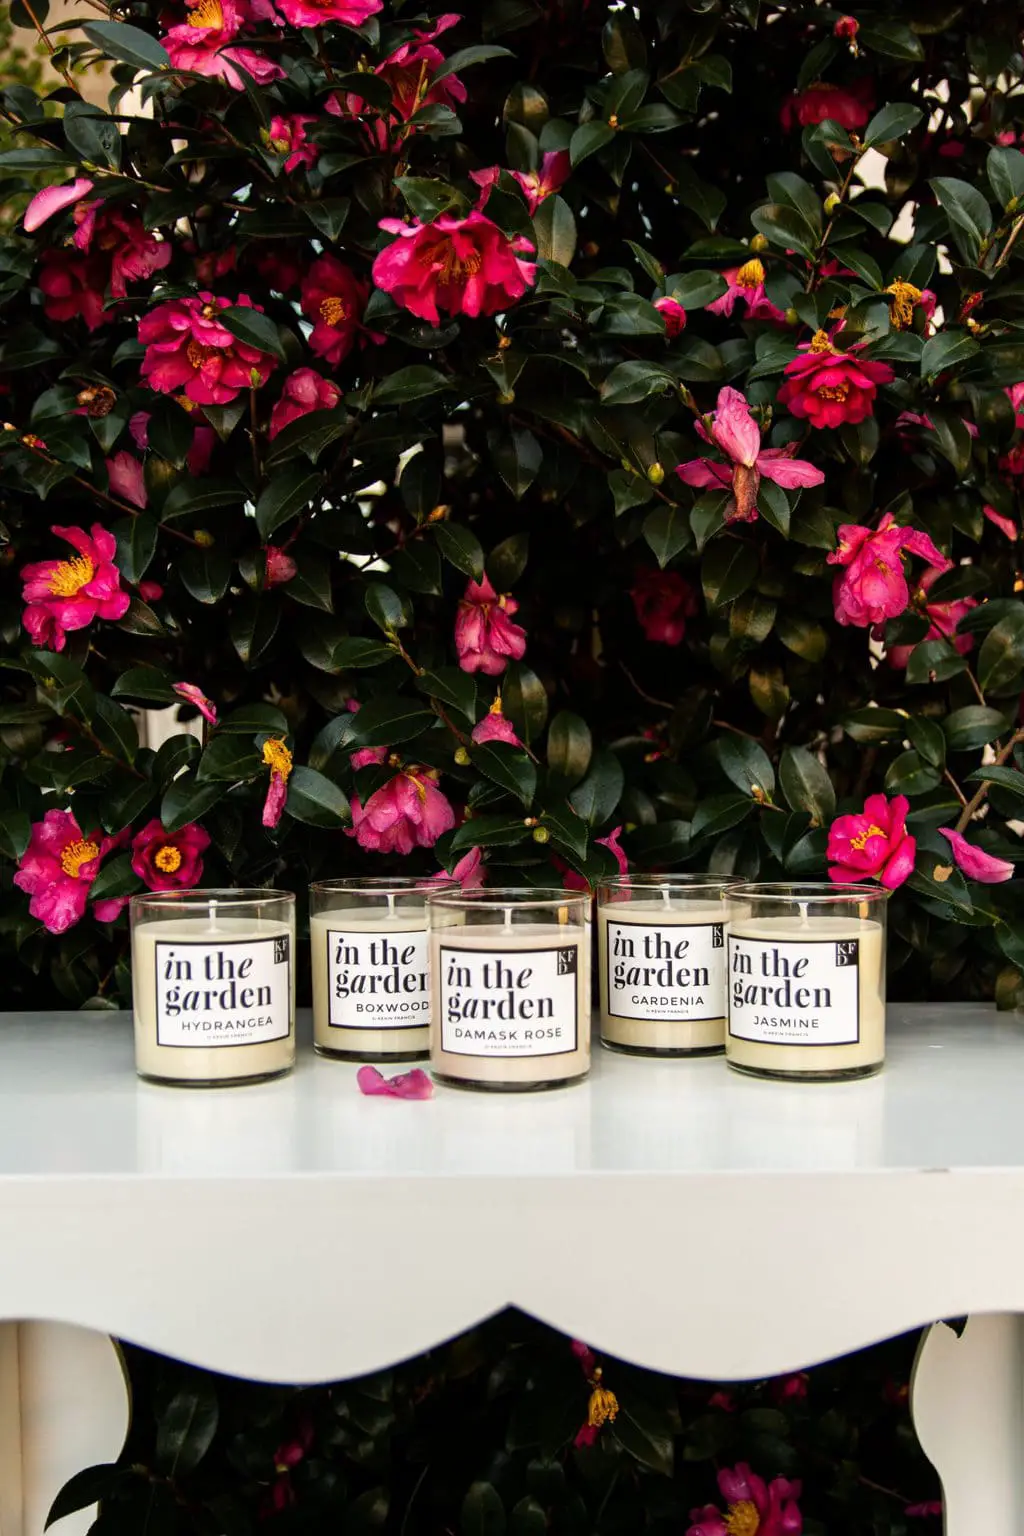 IN THE GARDEN scented candle collection inspired by the traditional Southern garden with boxwood, hydrangea, jasmine, damask rose, and jasmine by Kevin Francis Design #southerngarden #garden #gardening #candles #scentedcandle